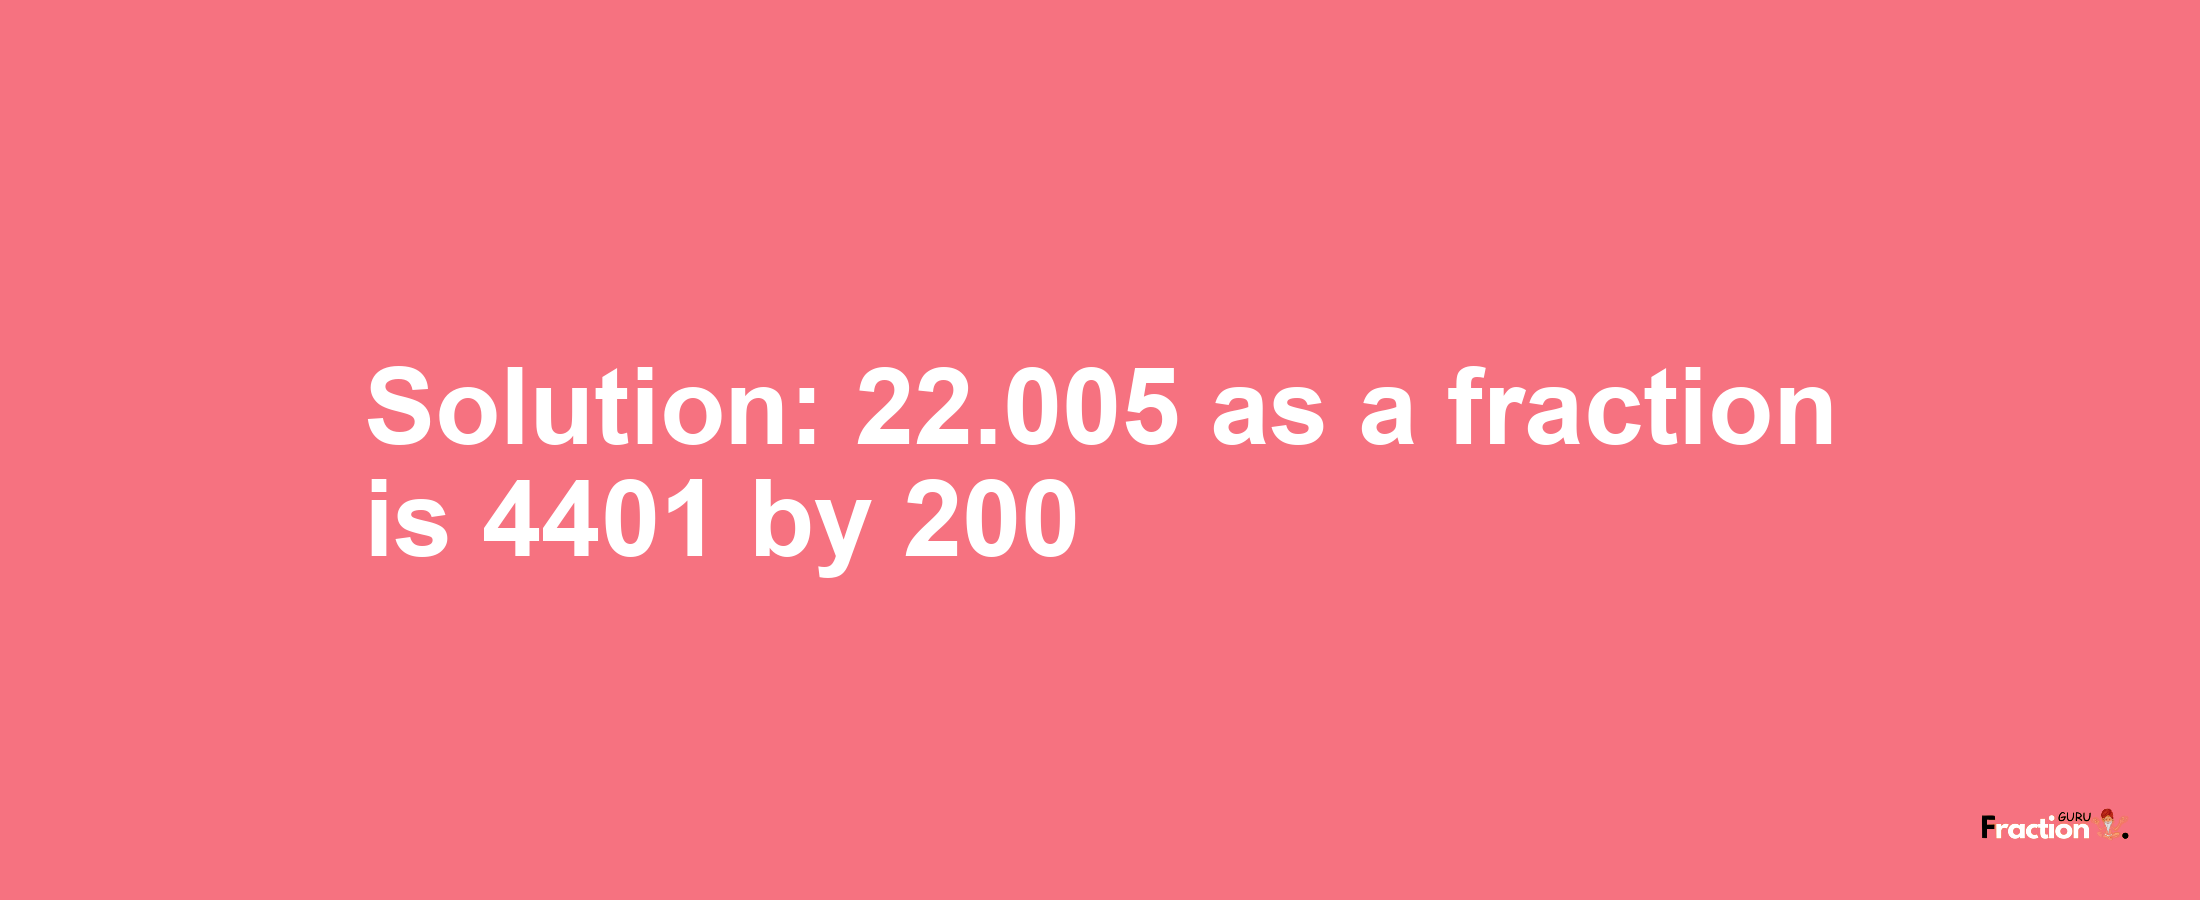 Solution:22.005 as a fraction is 4401/200